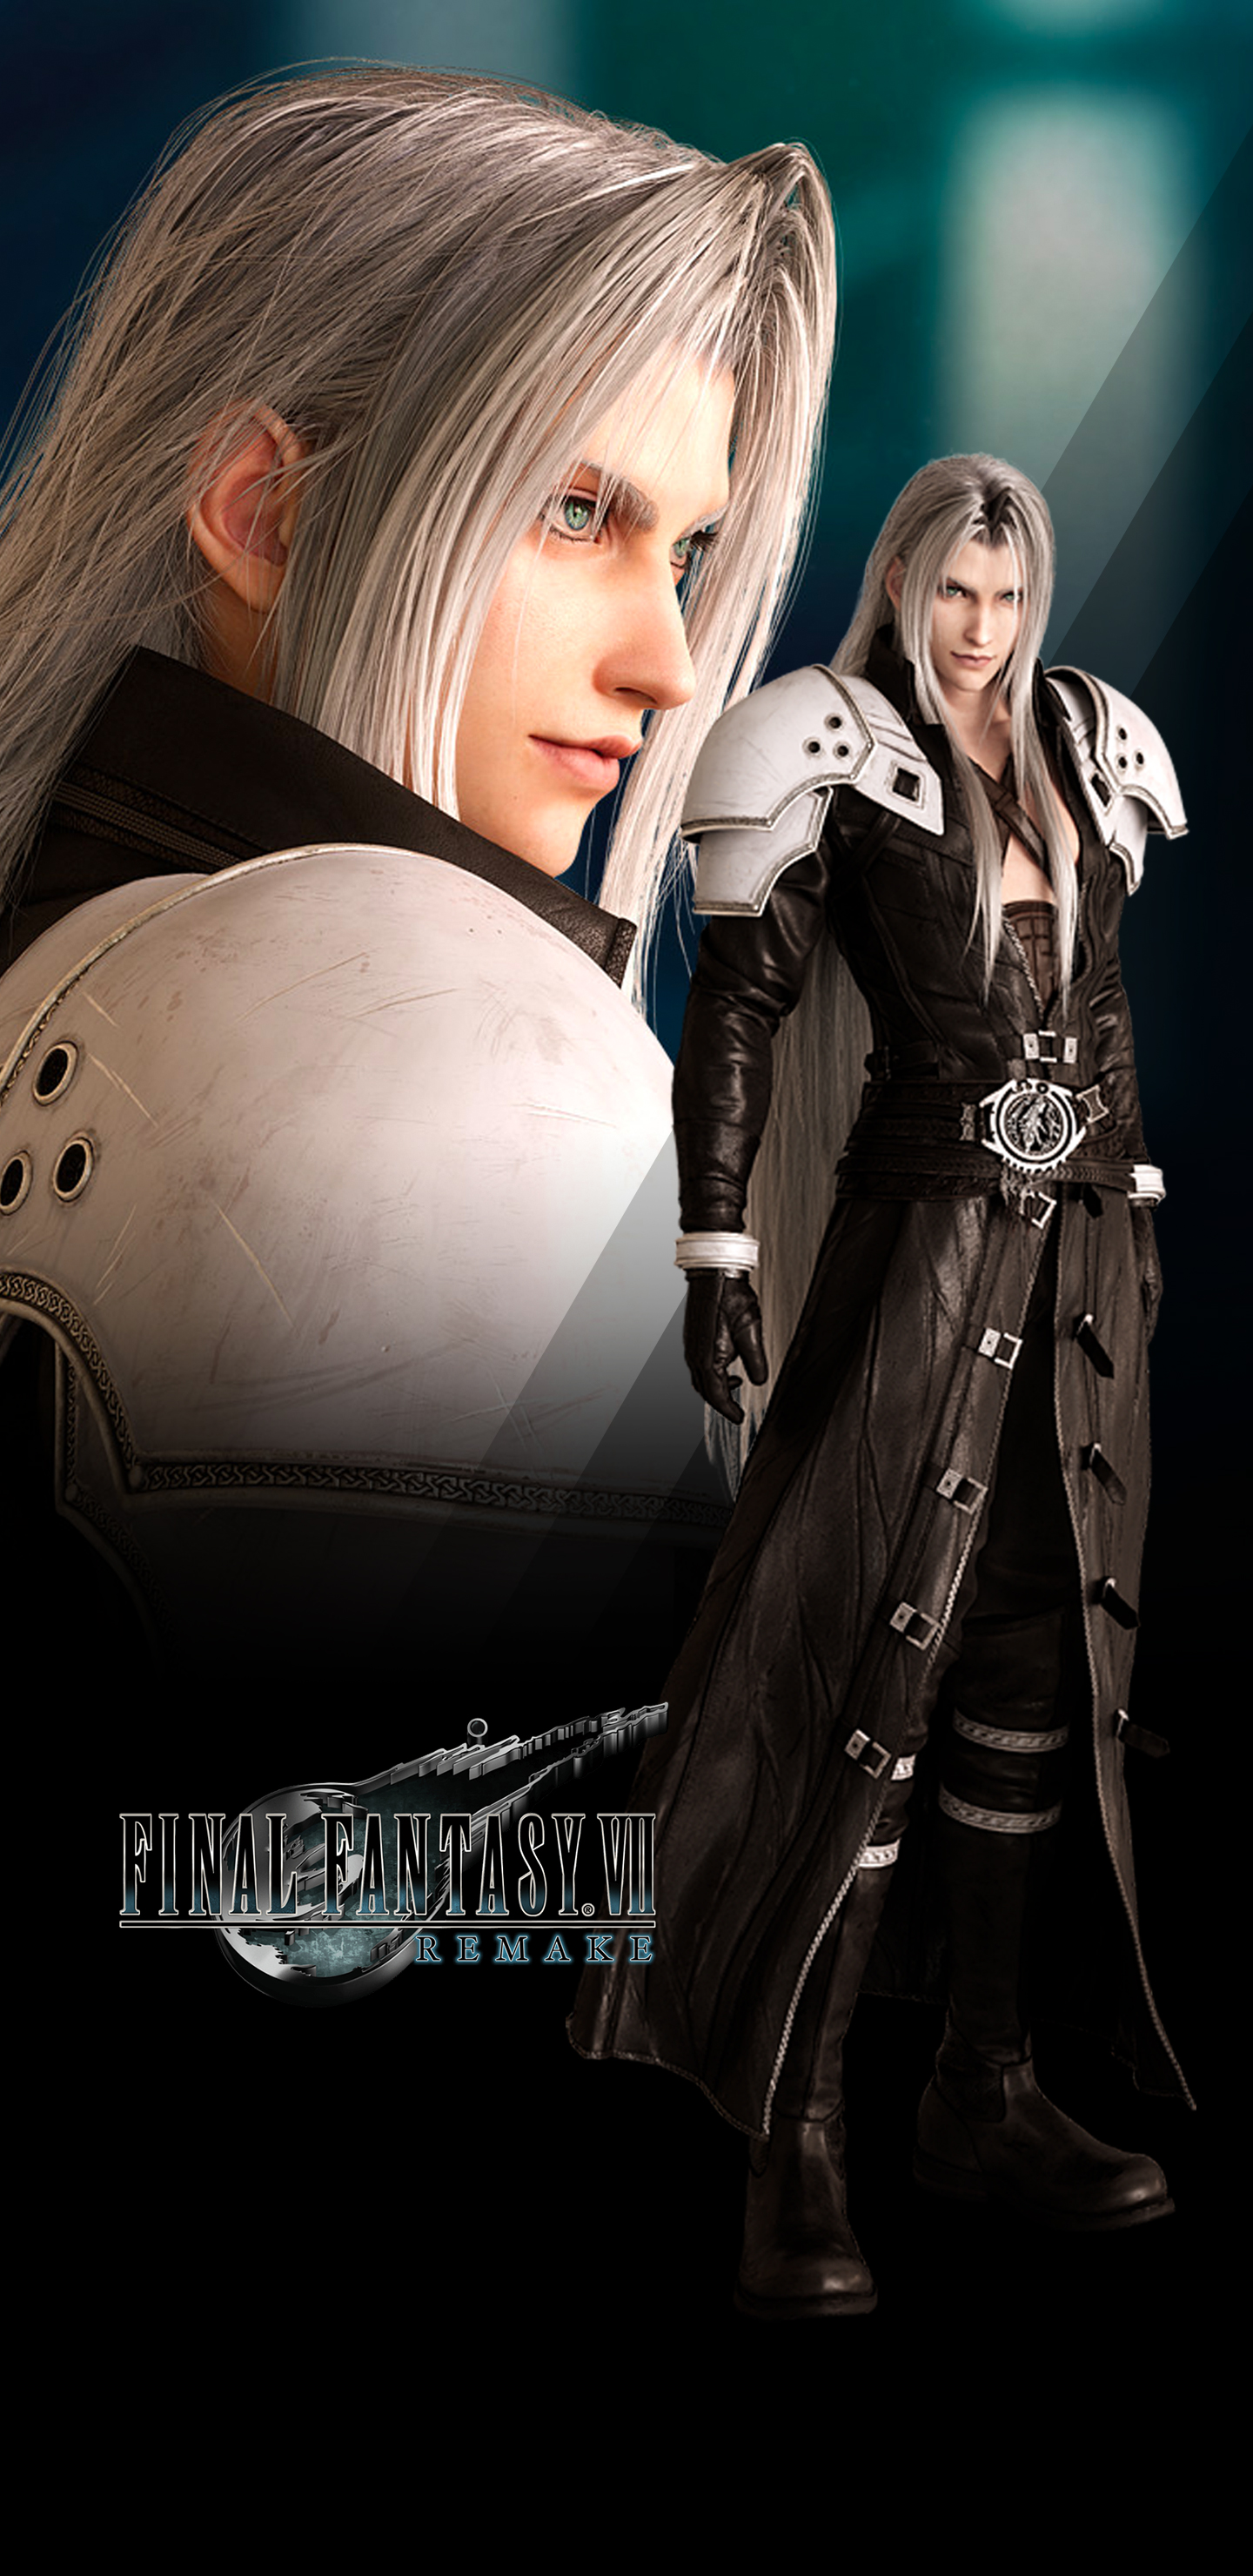 Final Fantasy VII Remake Sephiroth Version 2 Wallpaper | Cat with Monocle